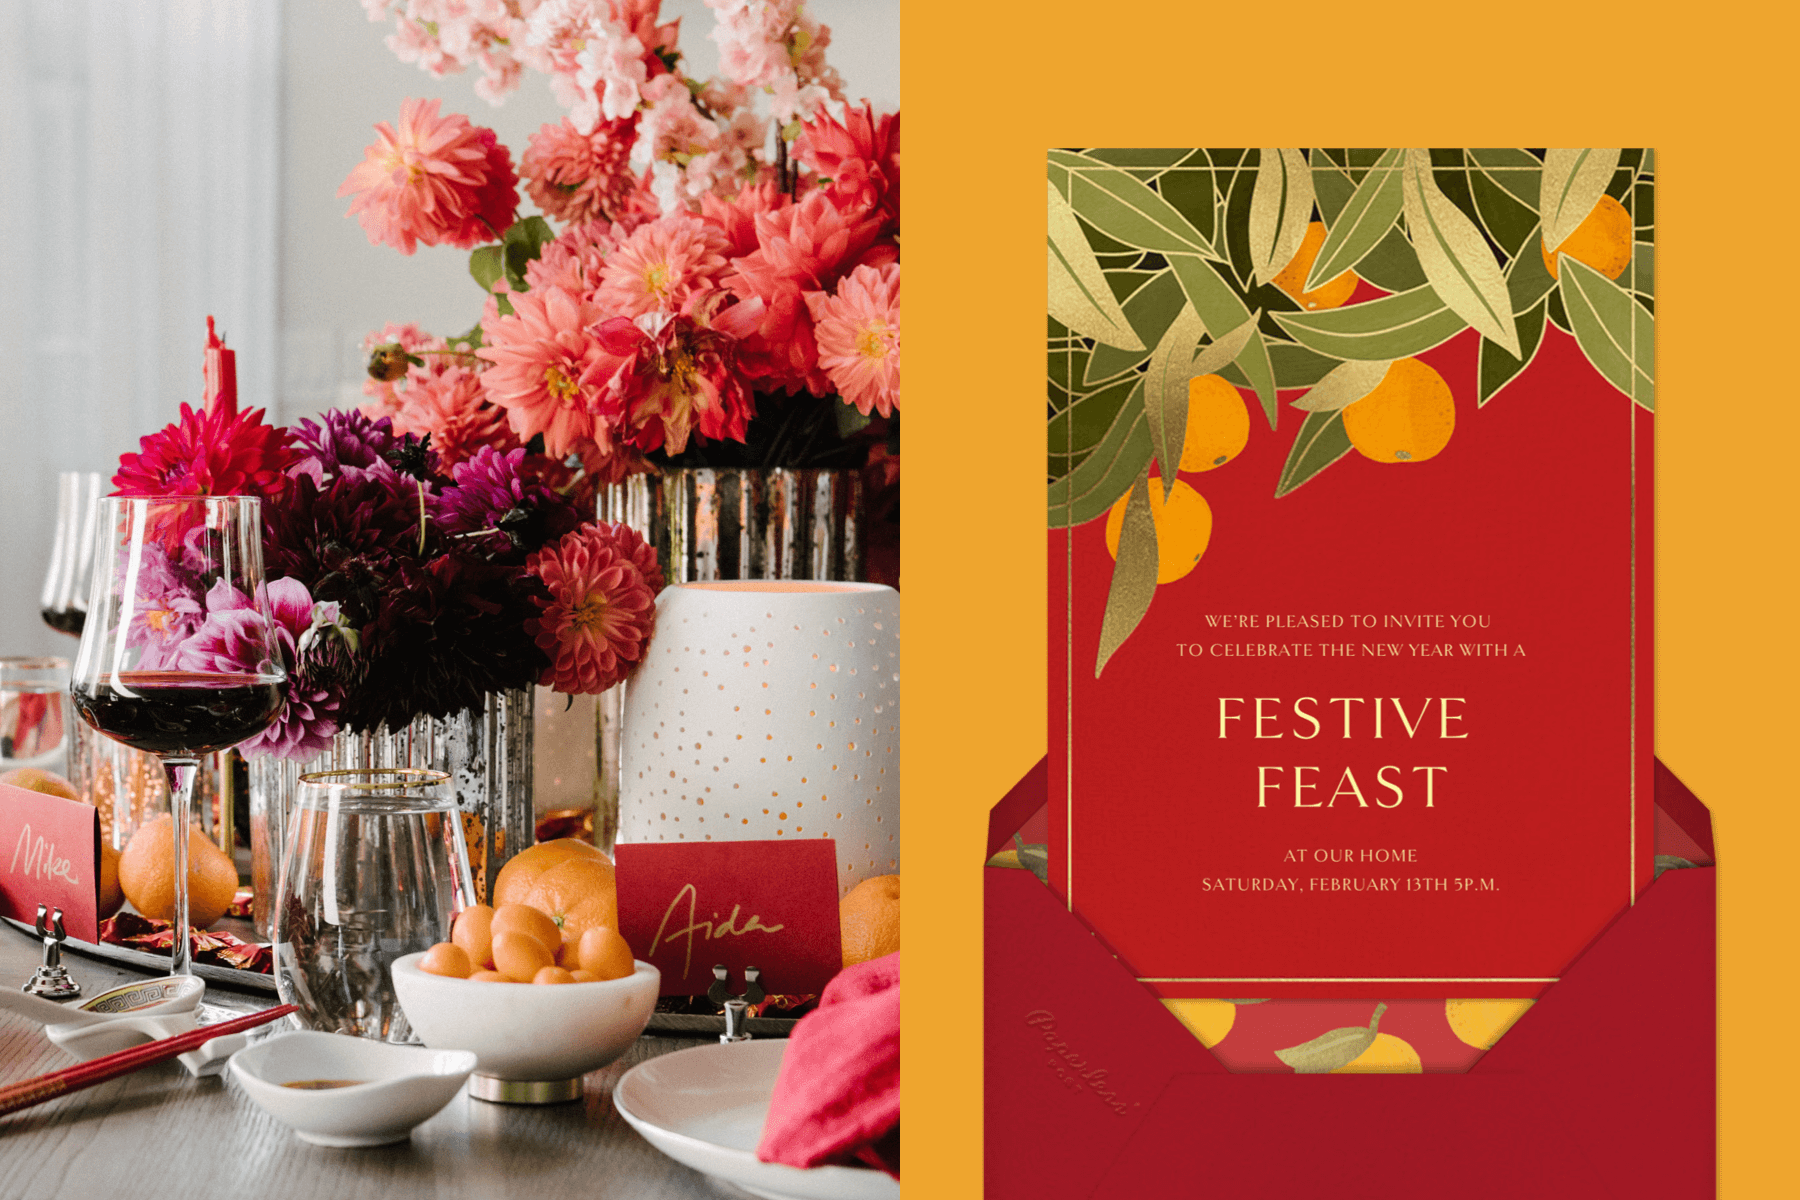 Left: A Lunar New Year table setting with wine and flowers. | Right: A Lunar New Year invitation featuring mandarins.